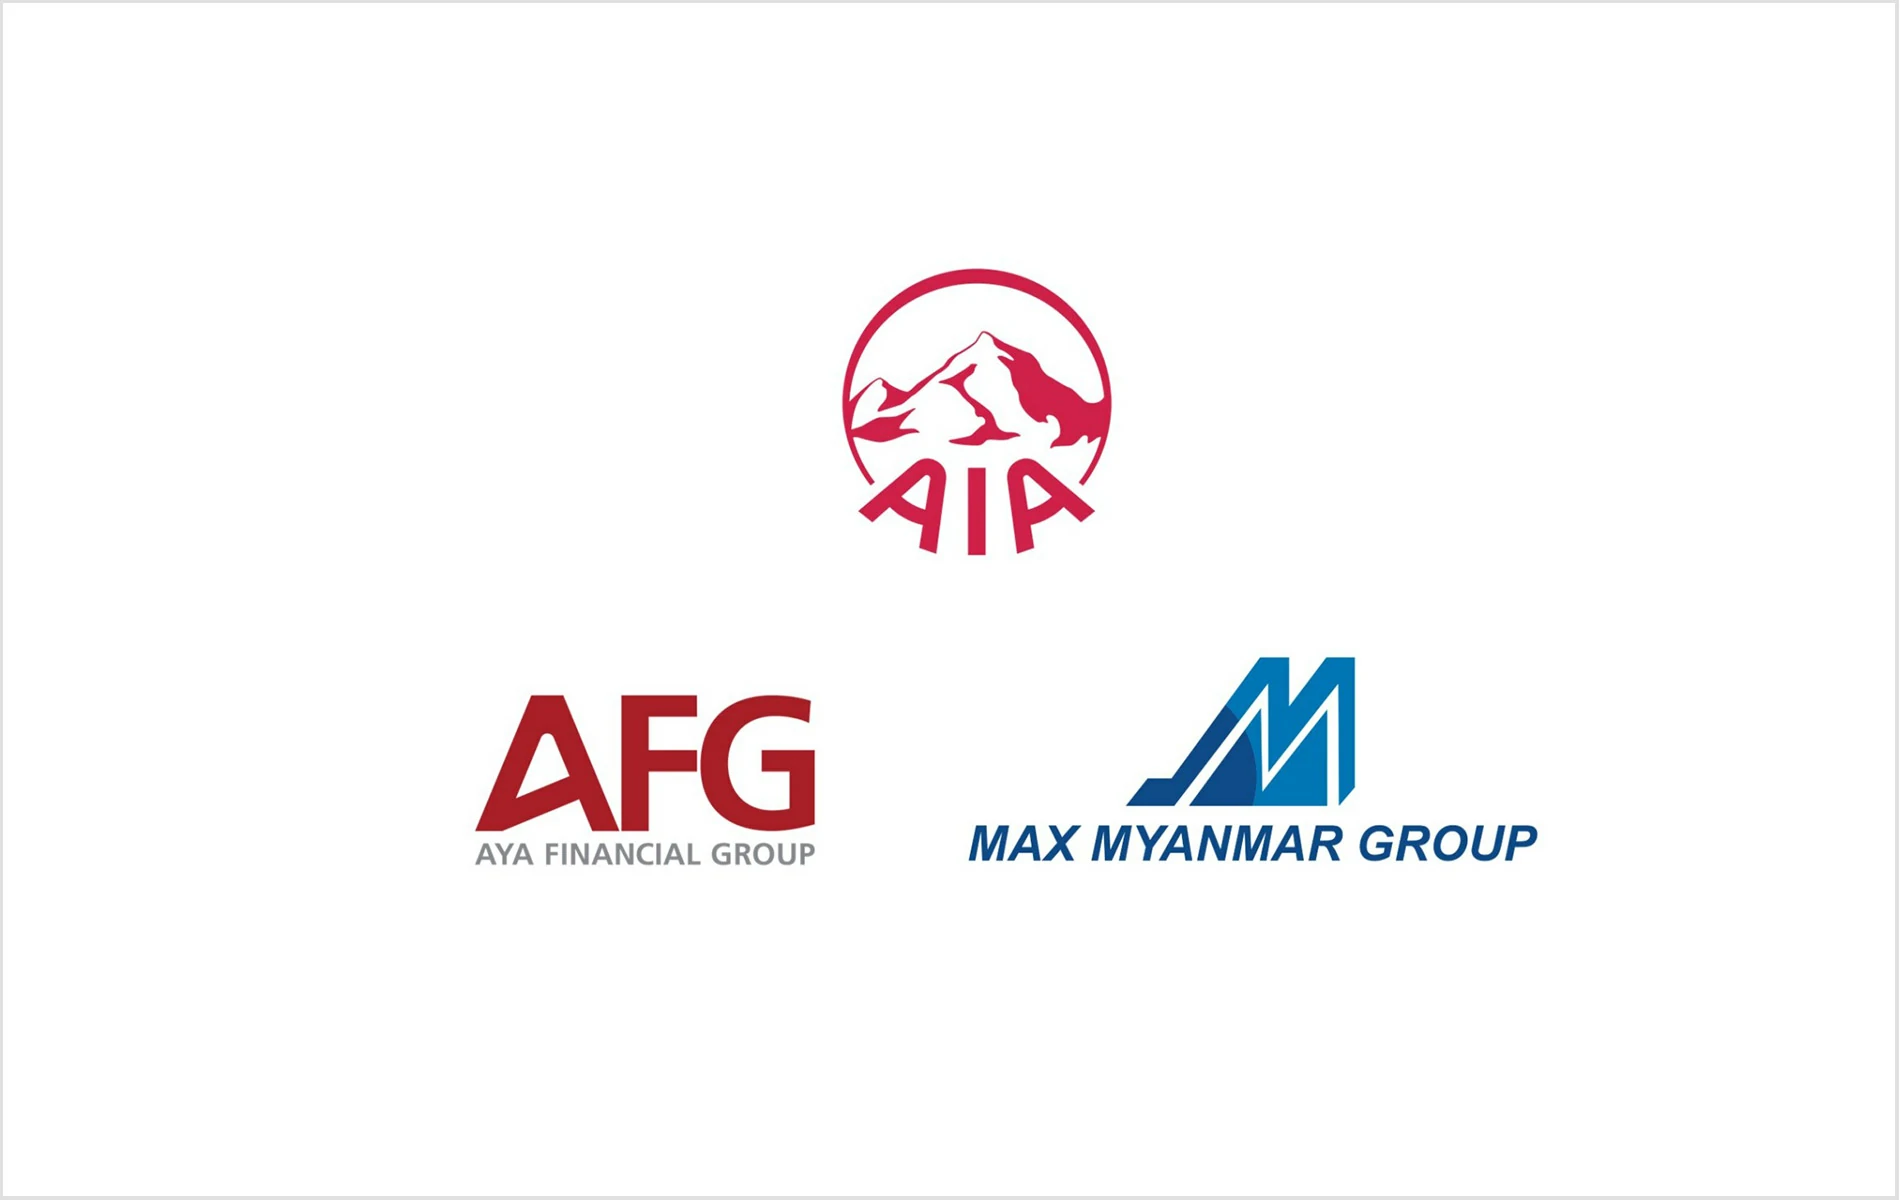 aia-and-aya-financial-group-max-myanmar-group-come-together-for-landmark-partnership-aimed-positively-impacting-lives-of-myanmar-people